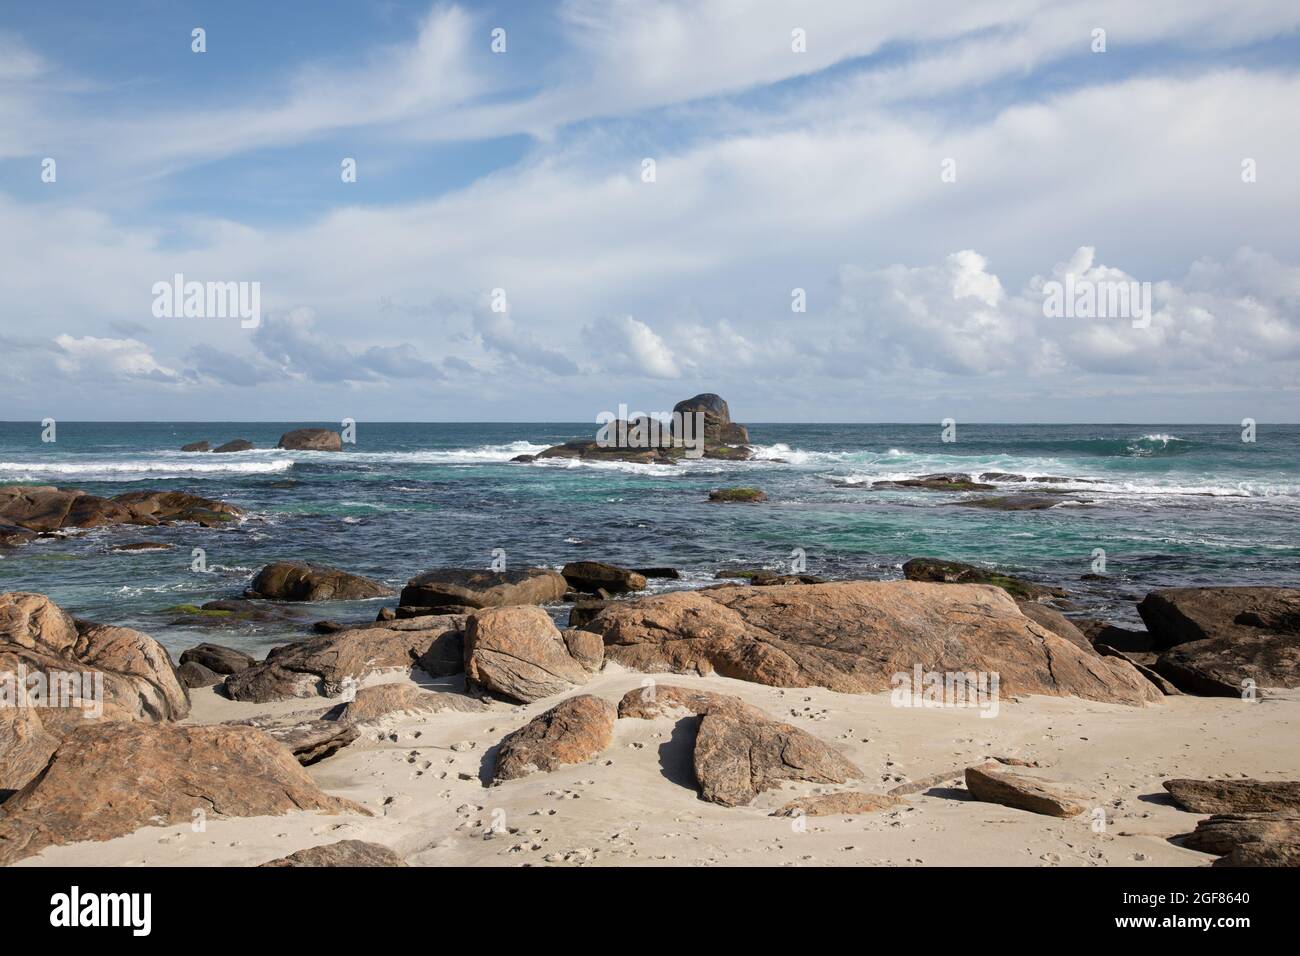 View to rock formation Indian Ocean, Redgate Beach, Western Australia Stock Photo